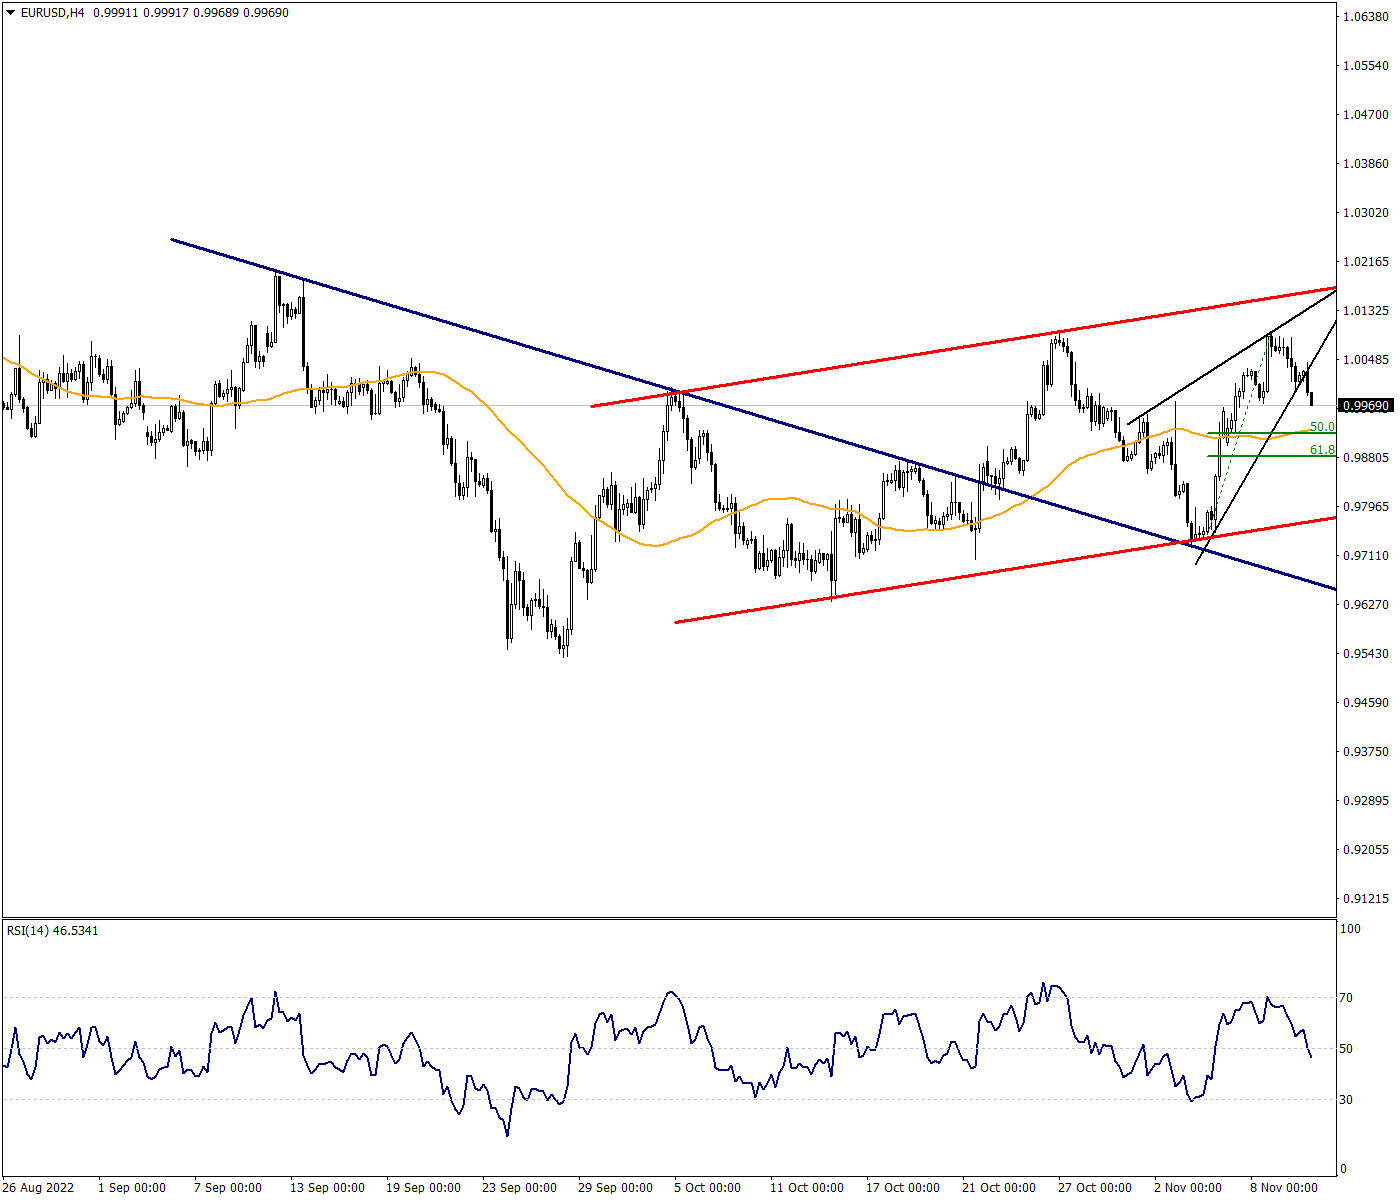 EURUSD Has Started the Retracement Movement